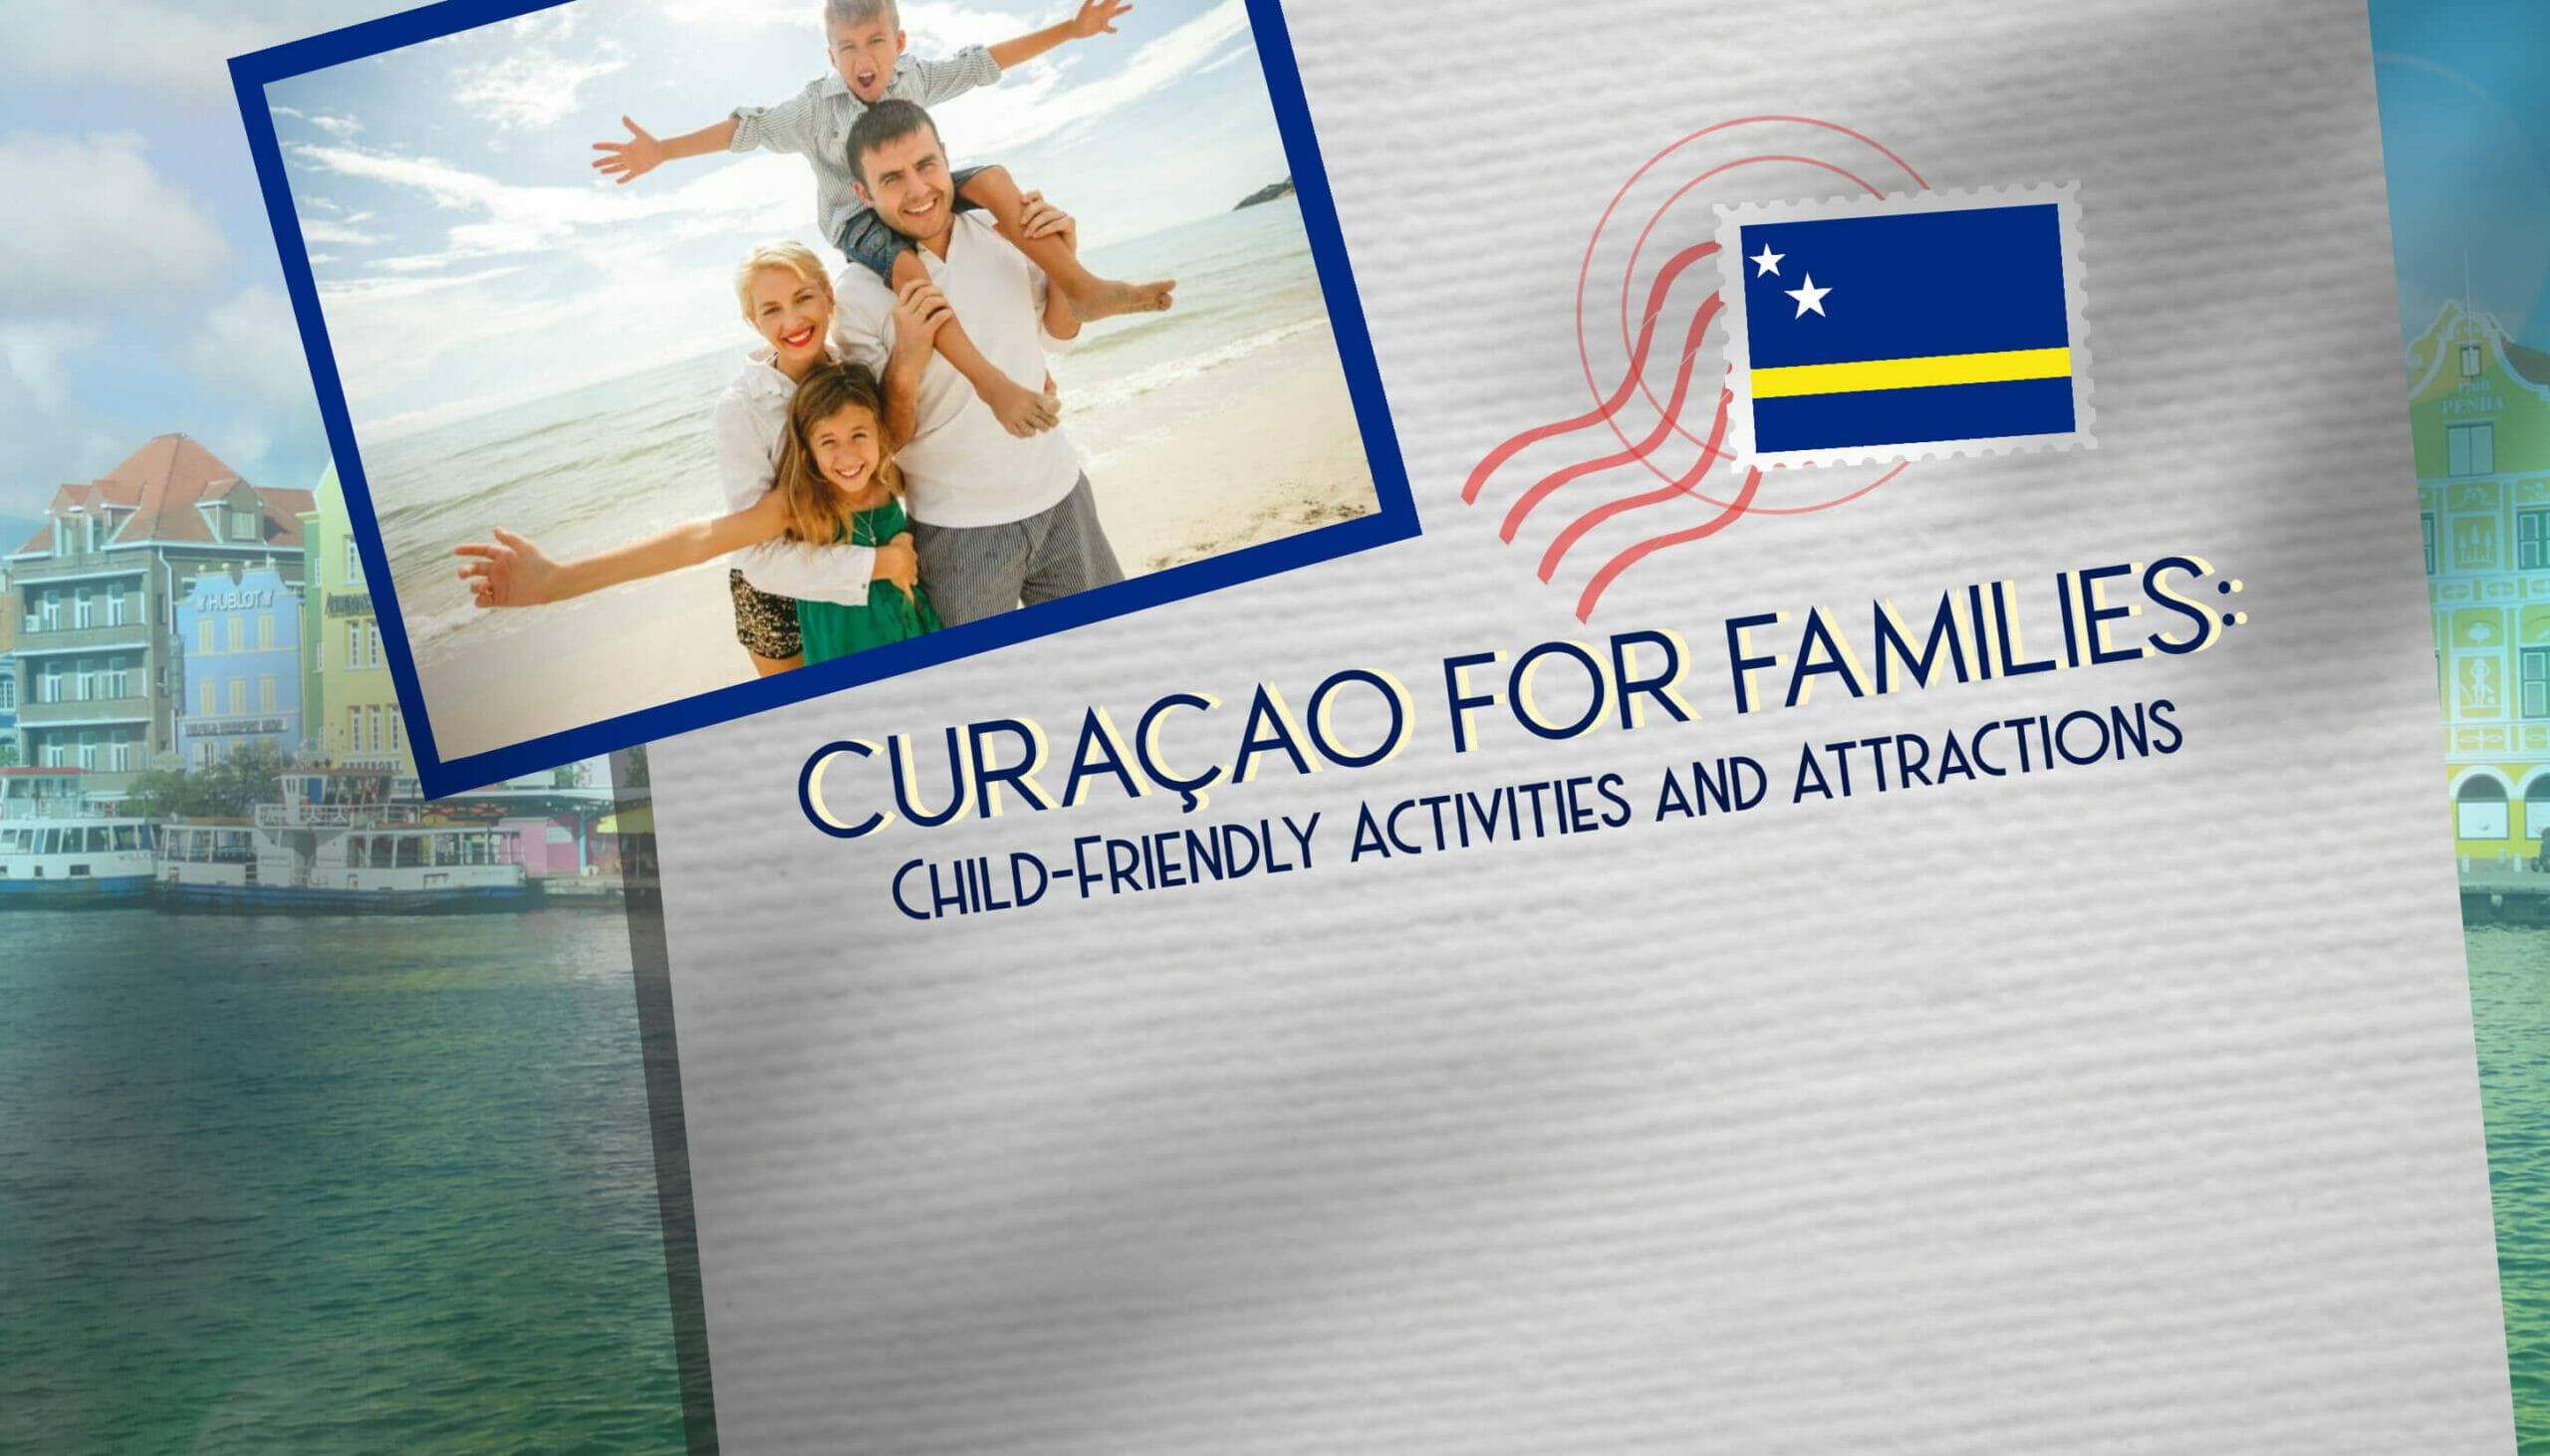 Curaçao for Families Child-Friendly Activities and Attractions